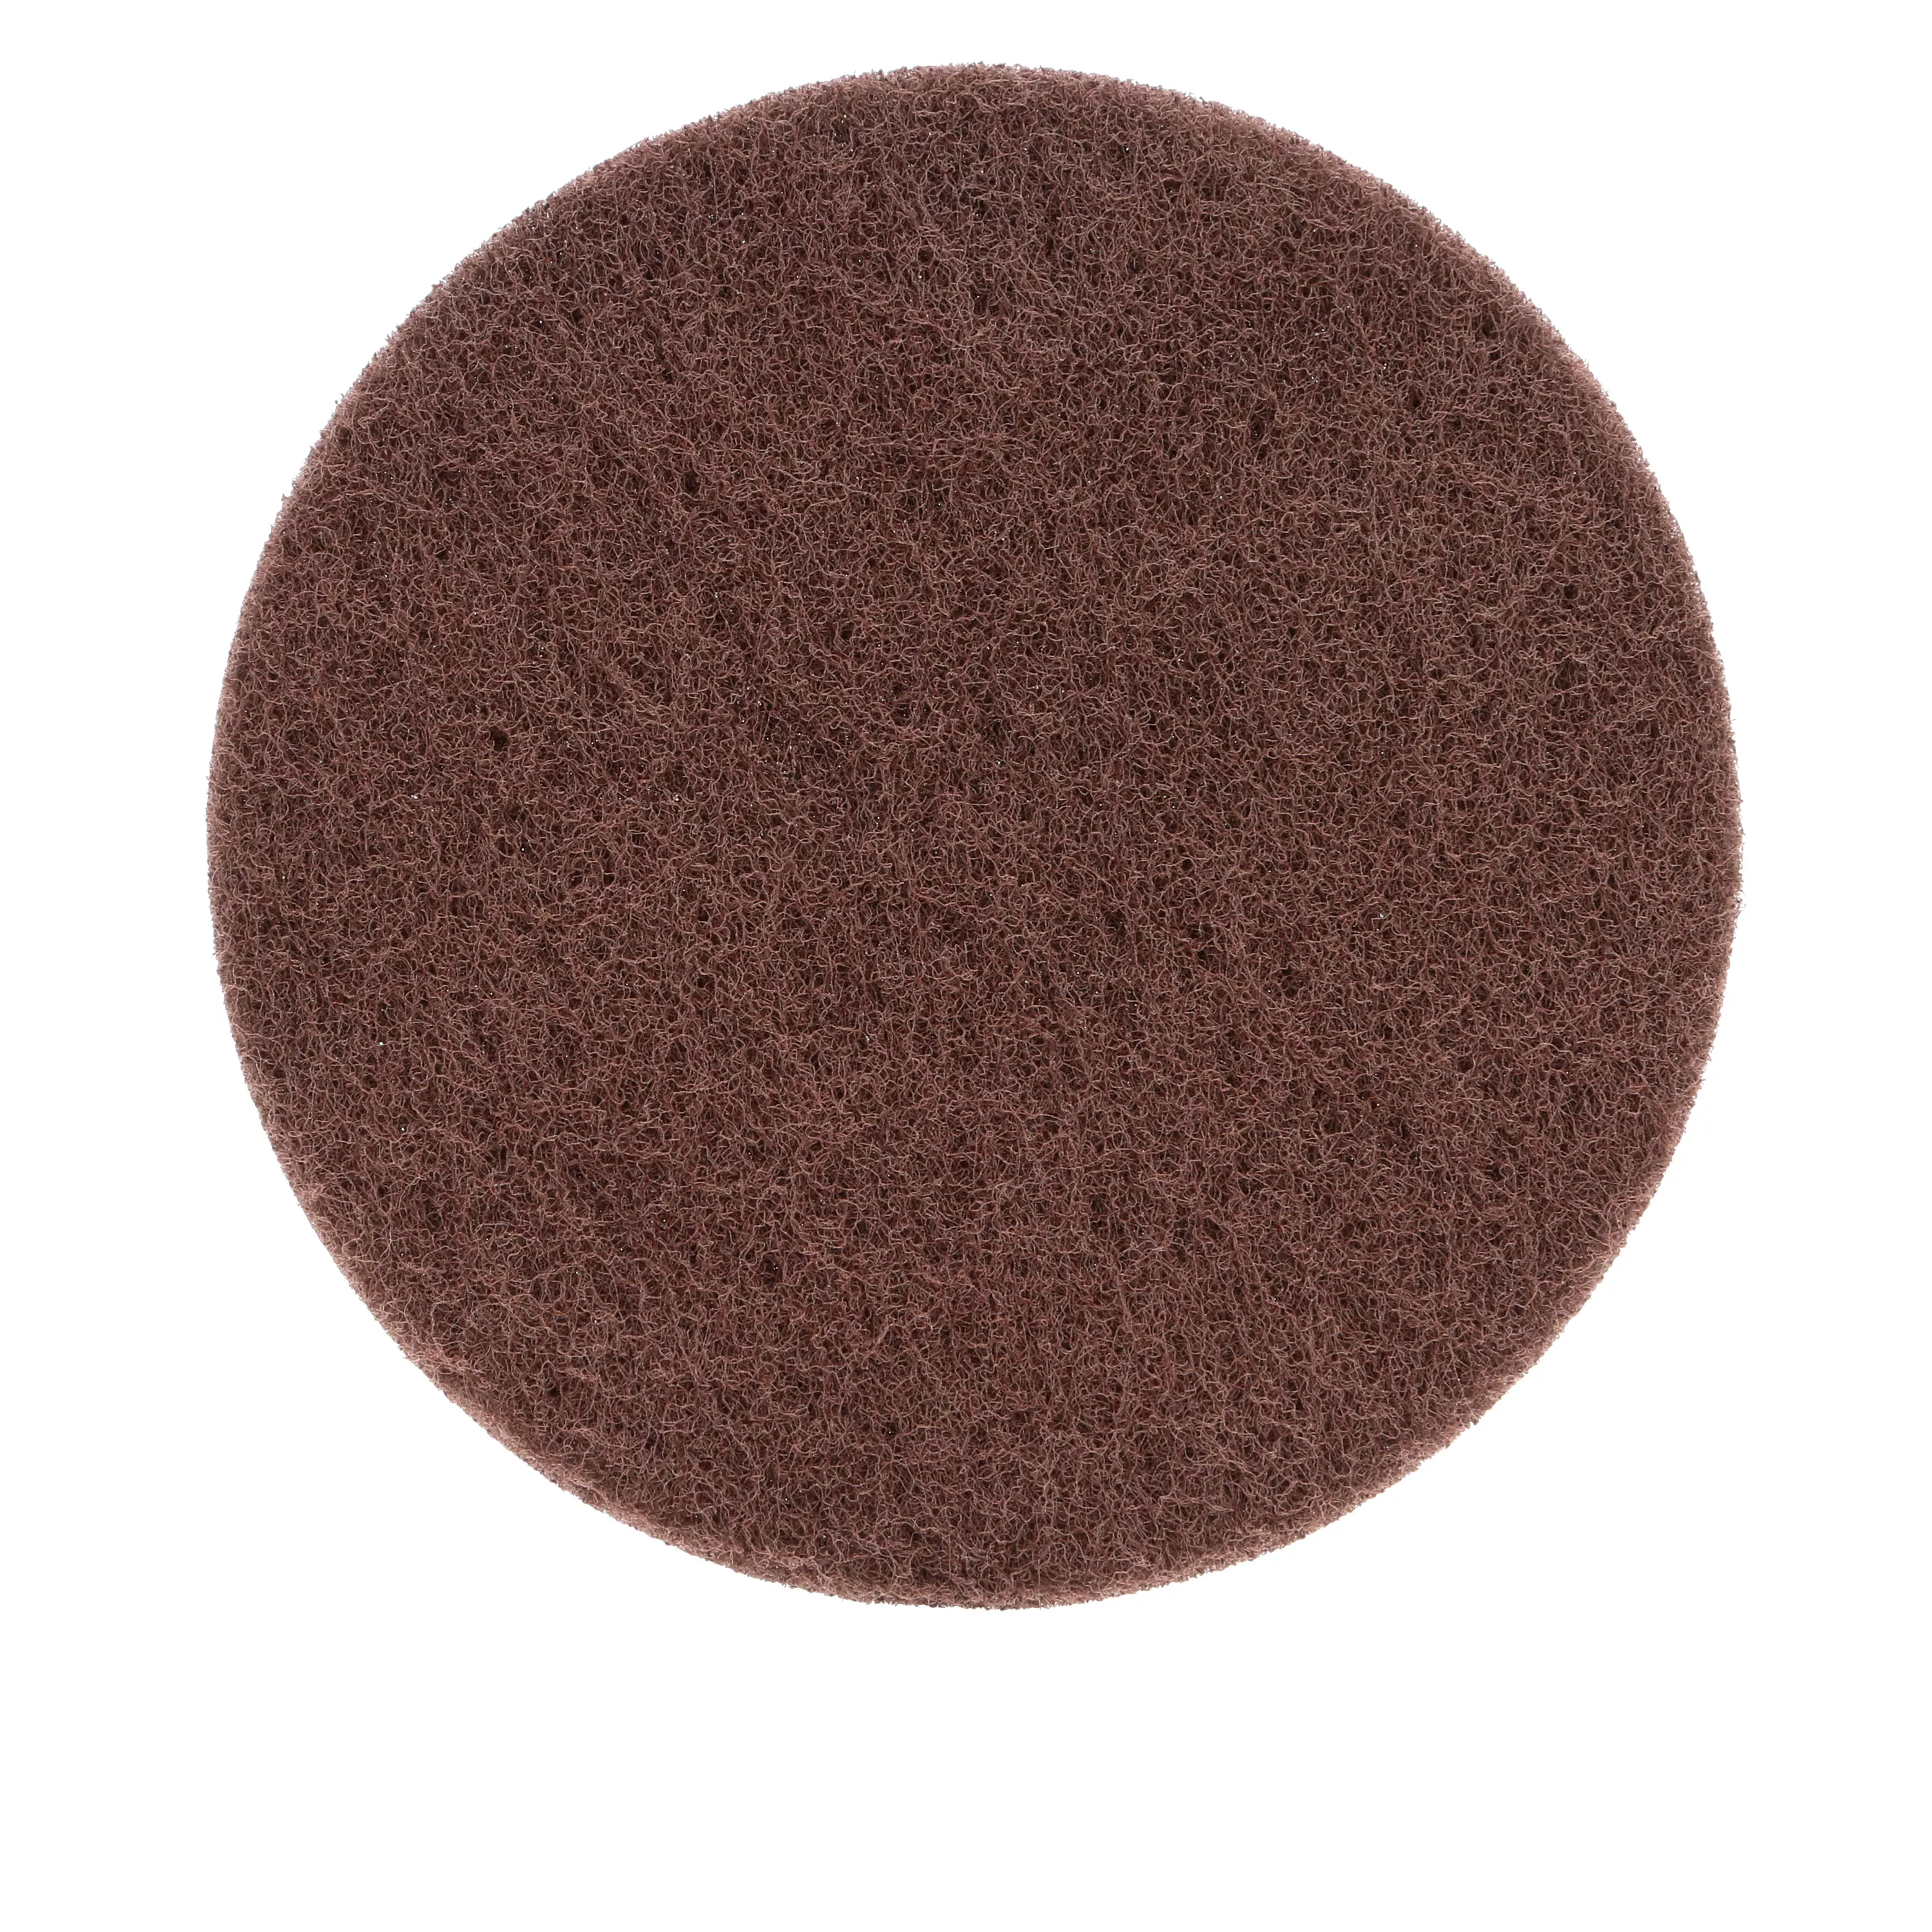 Standard Abrasives™ Buff and Blend Hook and Loop GP Vacuum Disc, 831708,
6 in A VFN, 10/Pac, 100 ea/Case